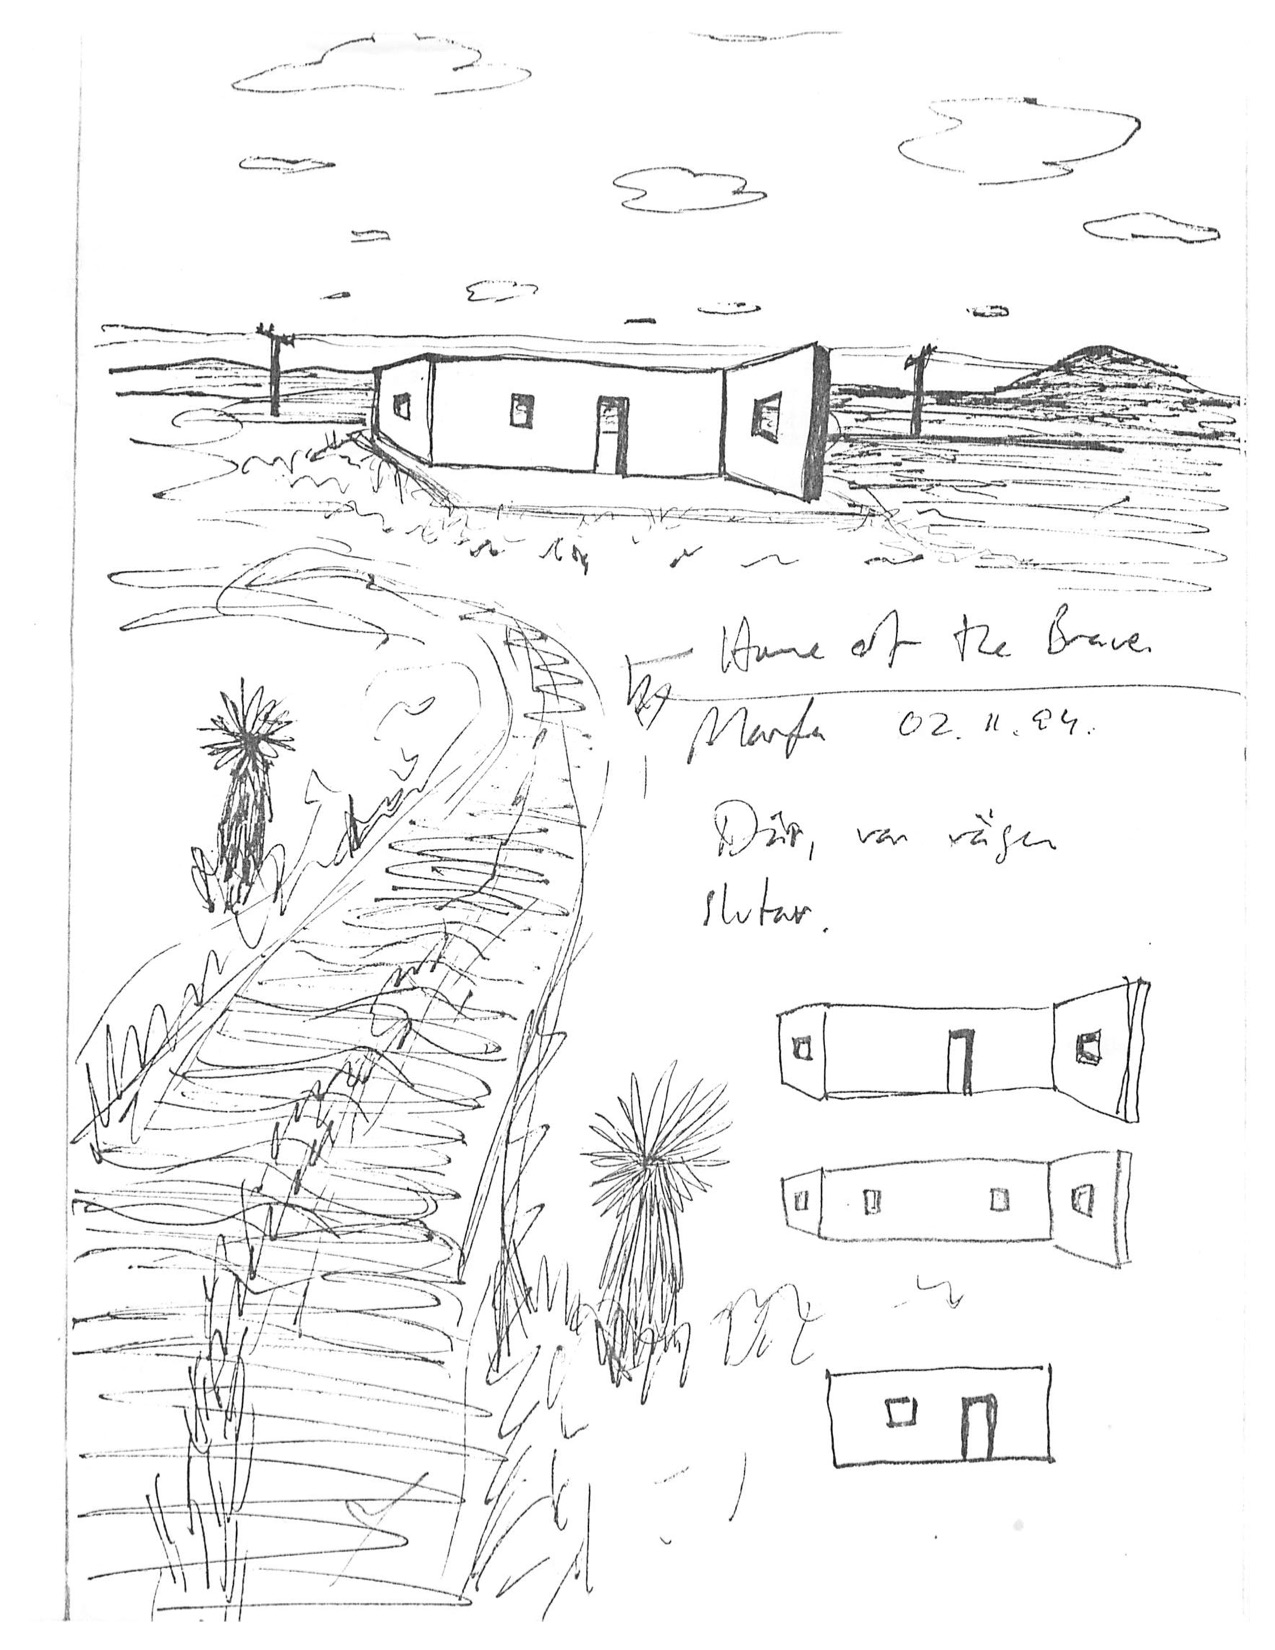 Drawing of a freestanding wall with door and window openings in a desert landscape, with mountain in the background and a winding road in the foreground